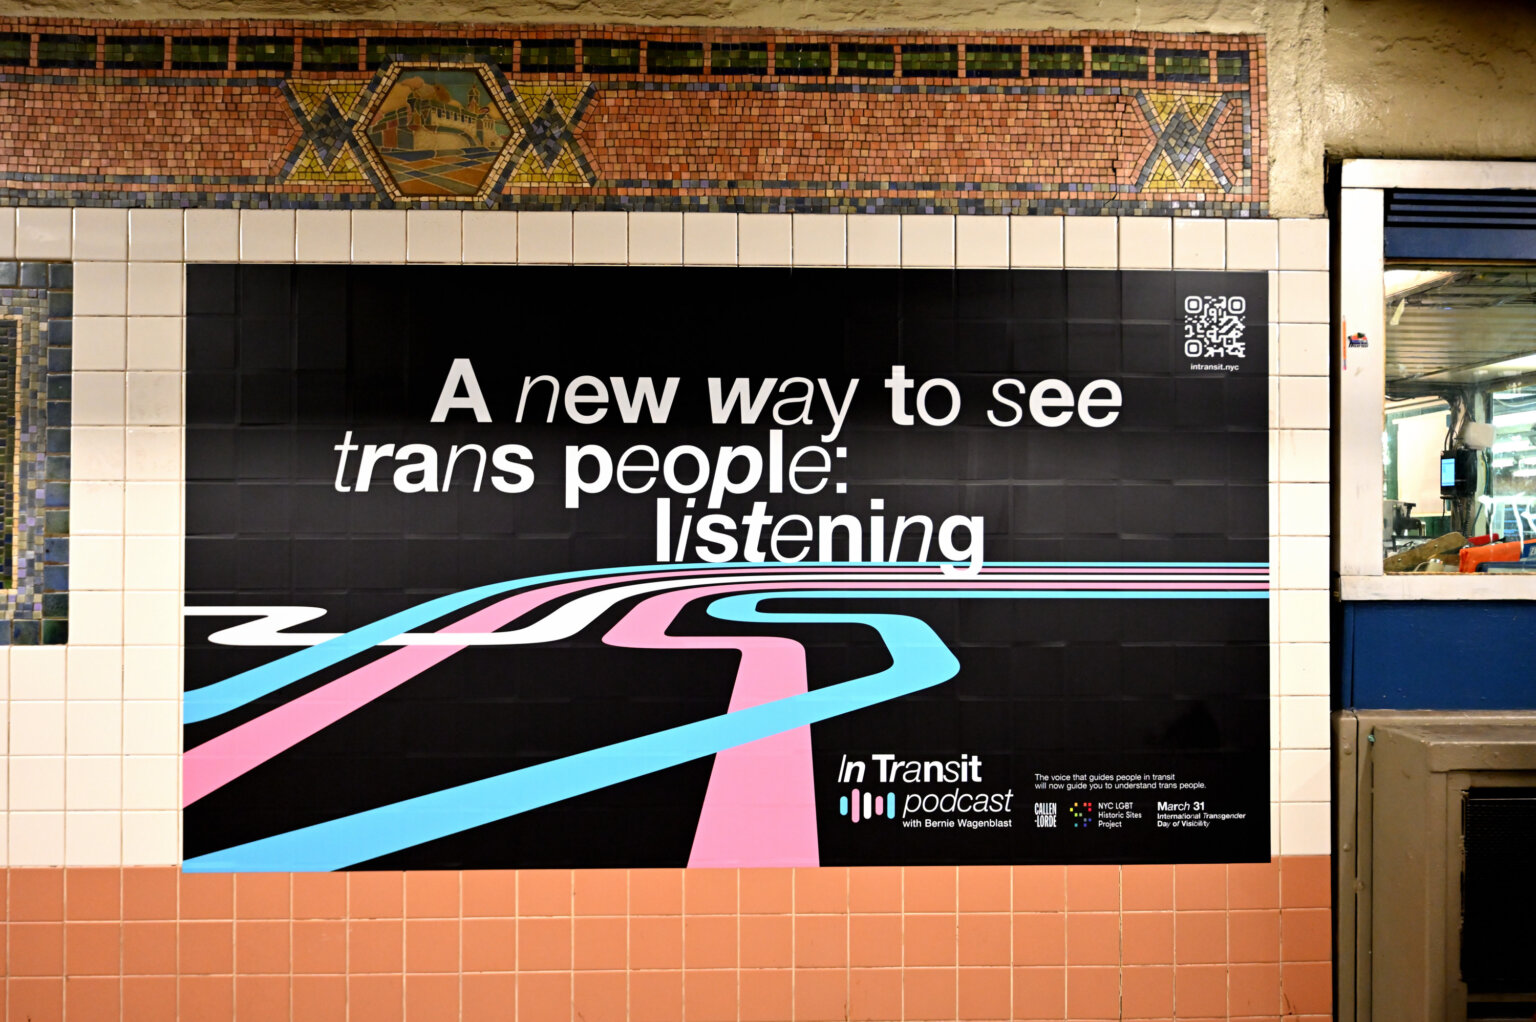 Campaign posters on TDOV